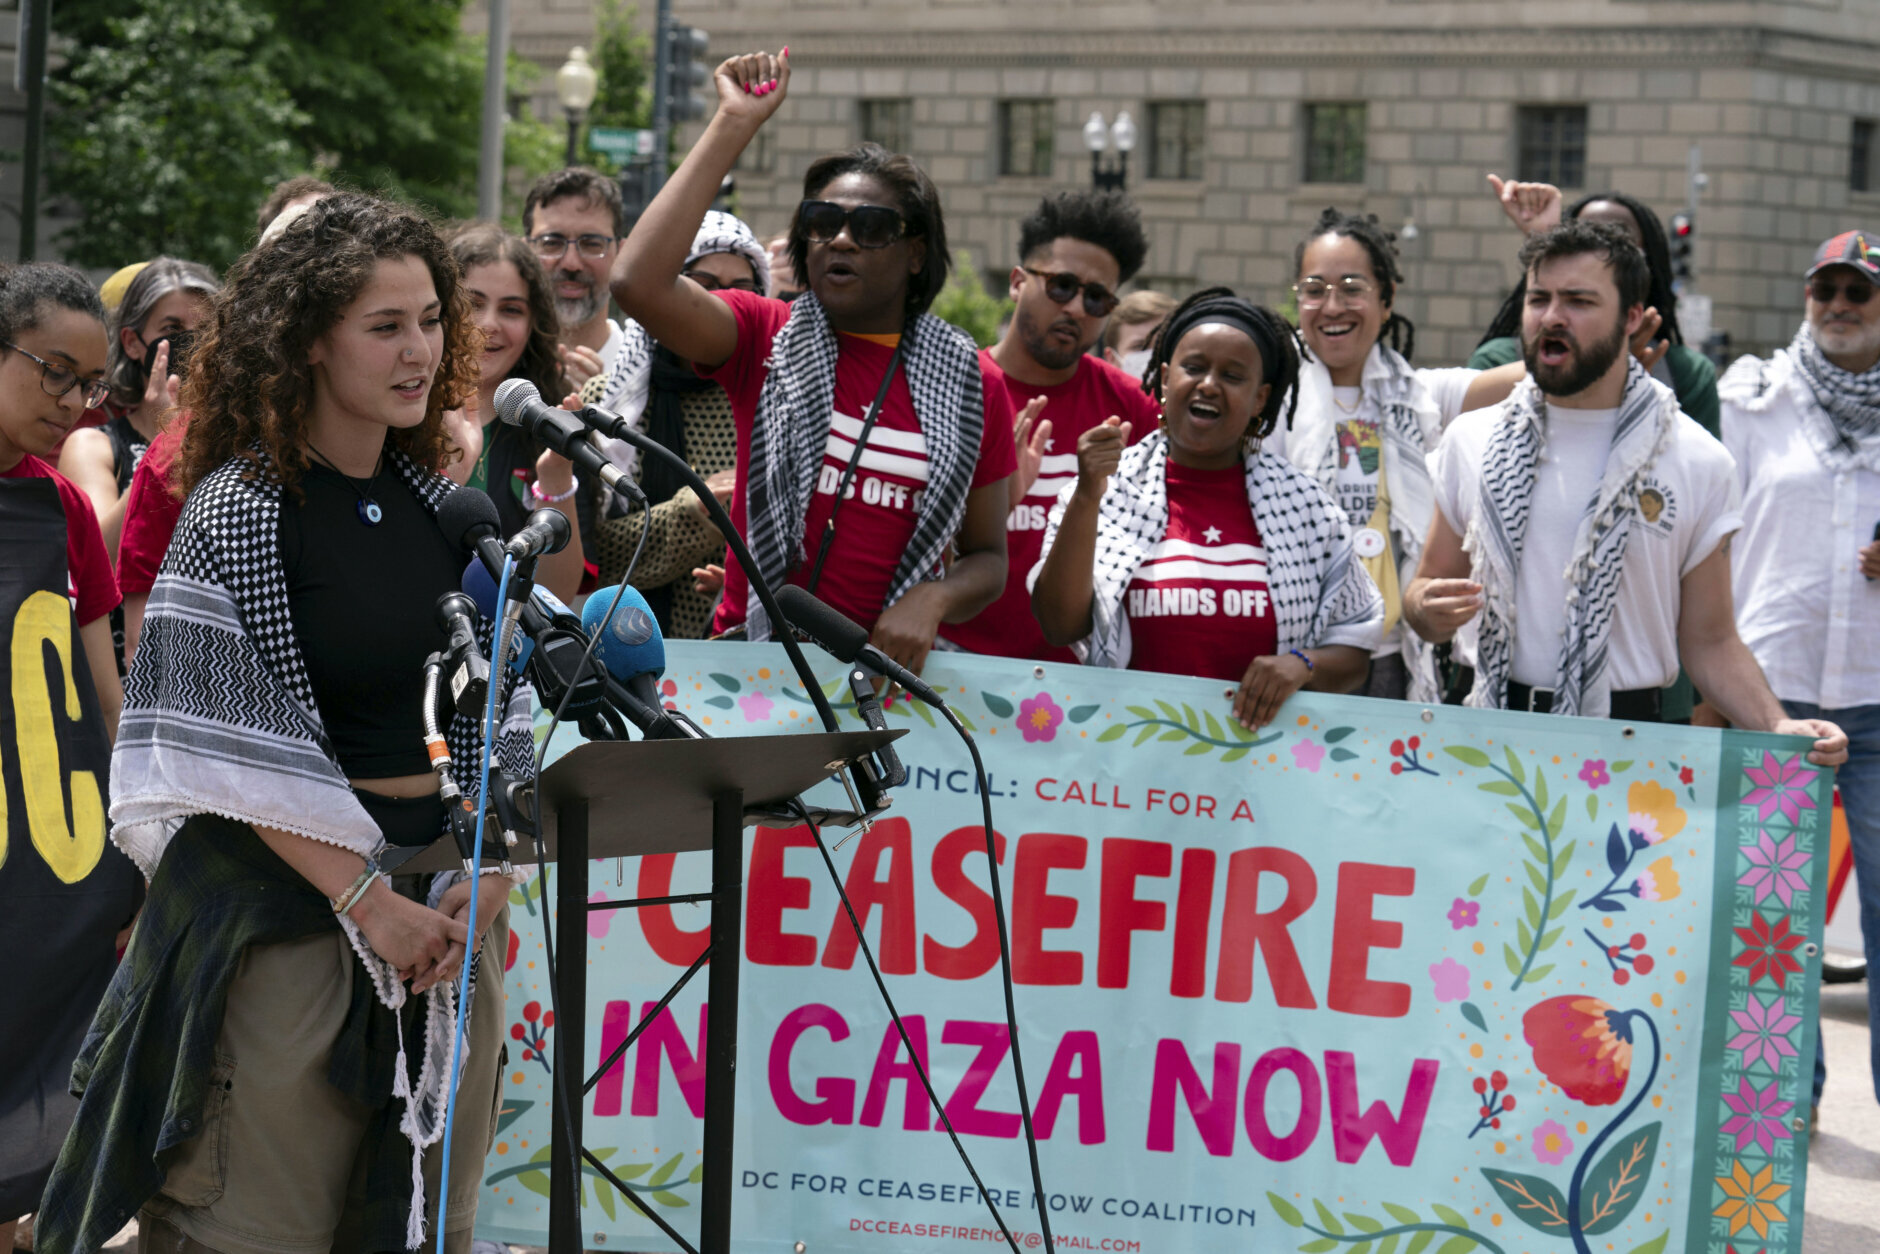 George Washington University student Noor speaks during a news conference after police cleared a pro-Palestinian tent encampment at George Washington University early Wednesday and arrested demonstrators, Wednesday, May 8, 2024, in Washington. (AP Photo/Jose Luis Magana)